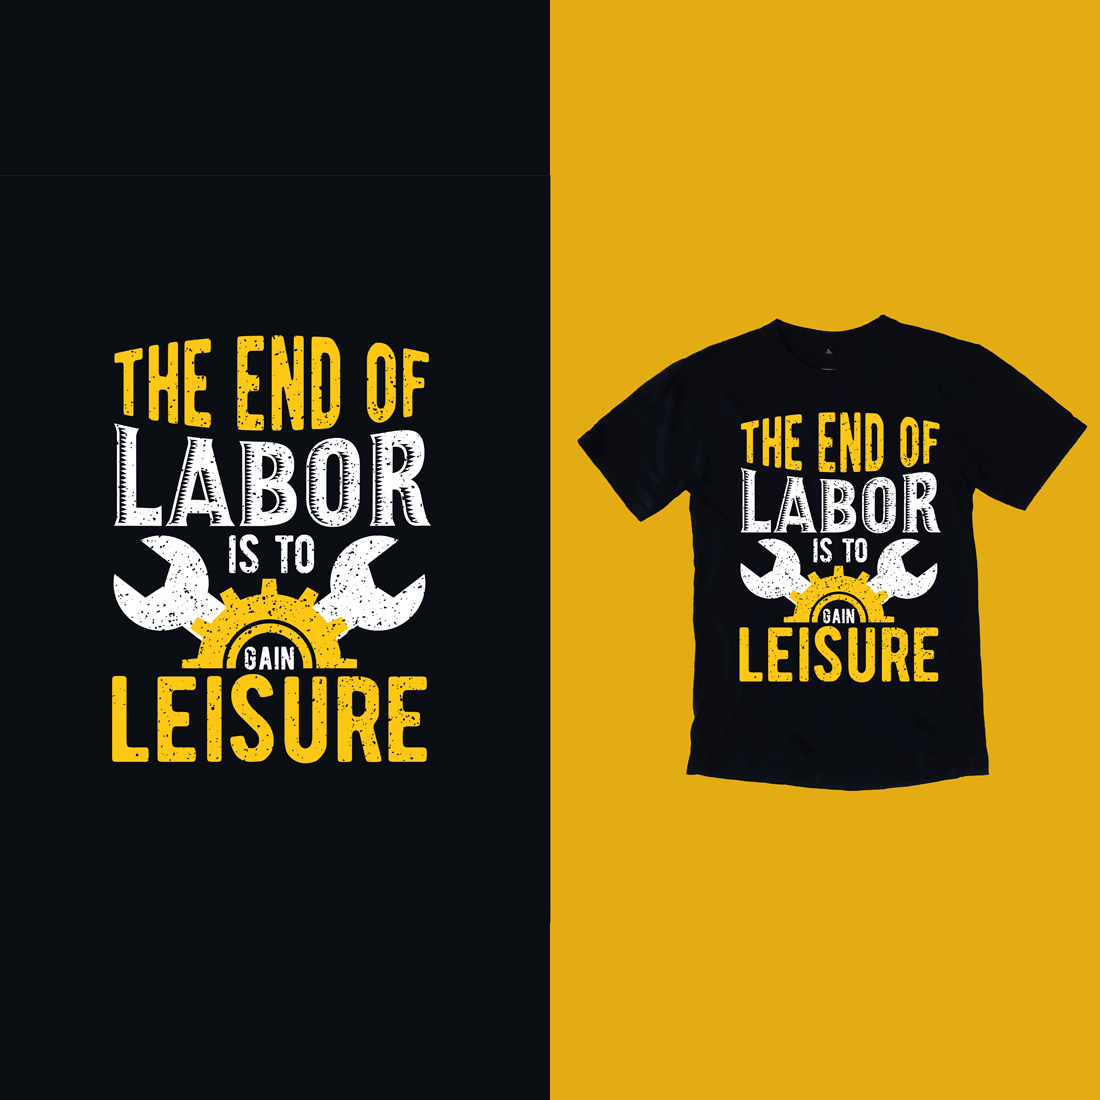 T - shirt that says the end of labor is to be leisure.